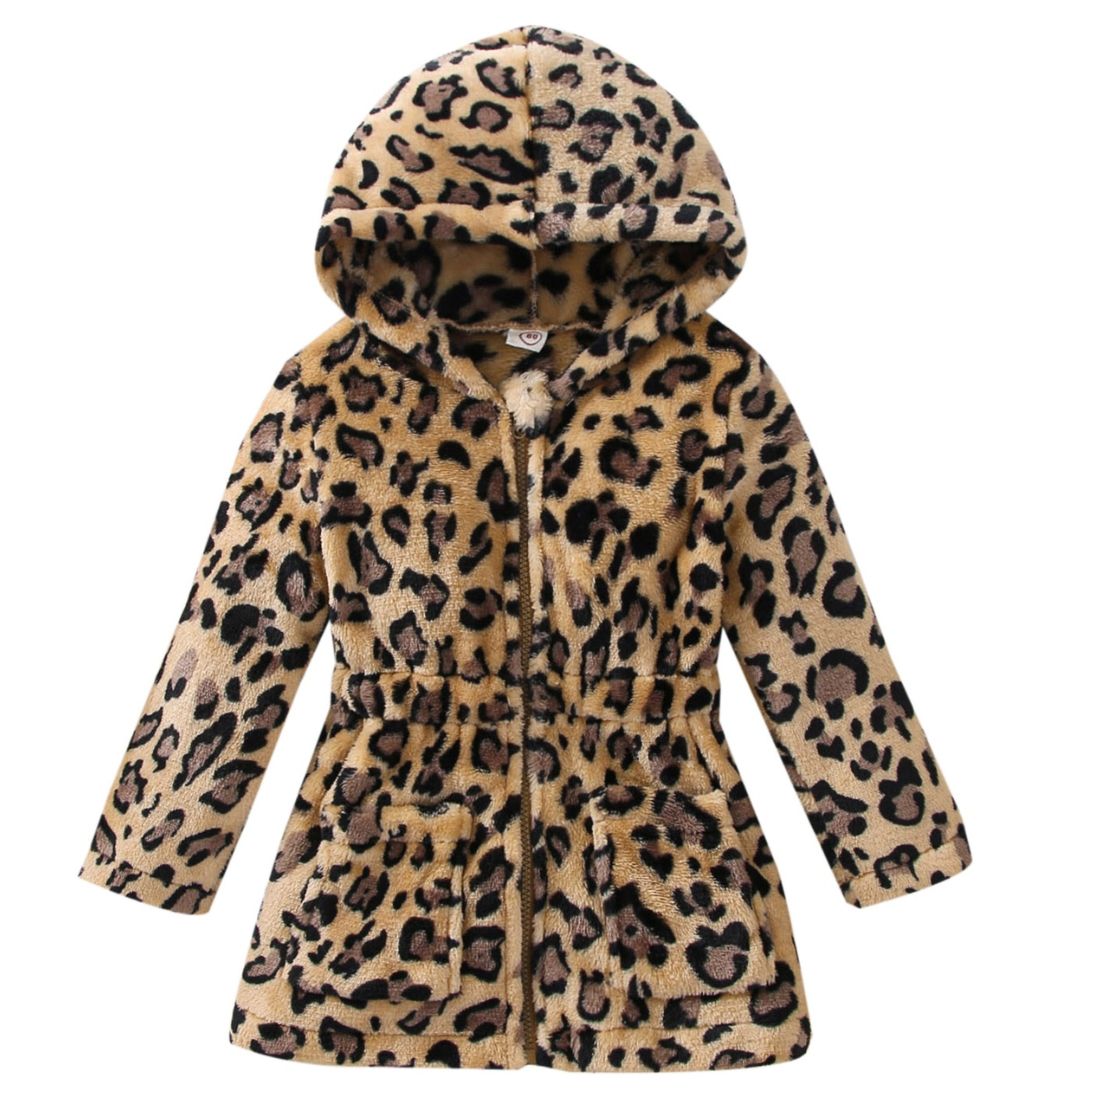 Little Girl Leopard Hooded Toddler Coat - My Trendy Youngsters | Clothing Sets @ My Trendy Youngsters - Dress your little one in Style @ My Trendy Youngsters 